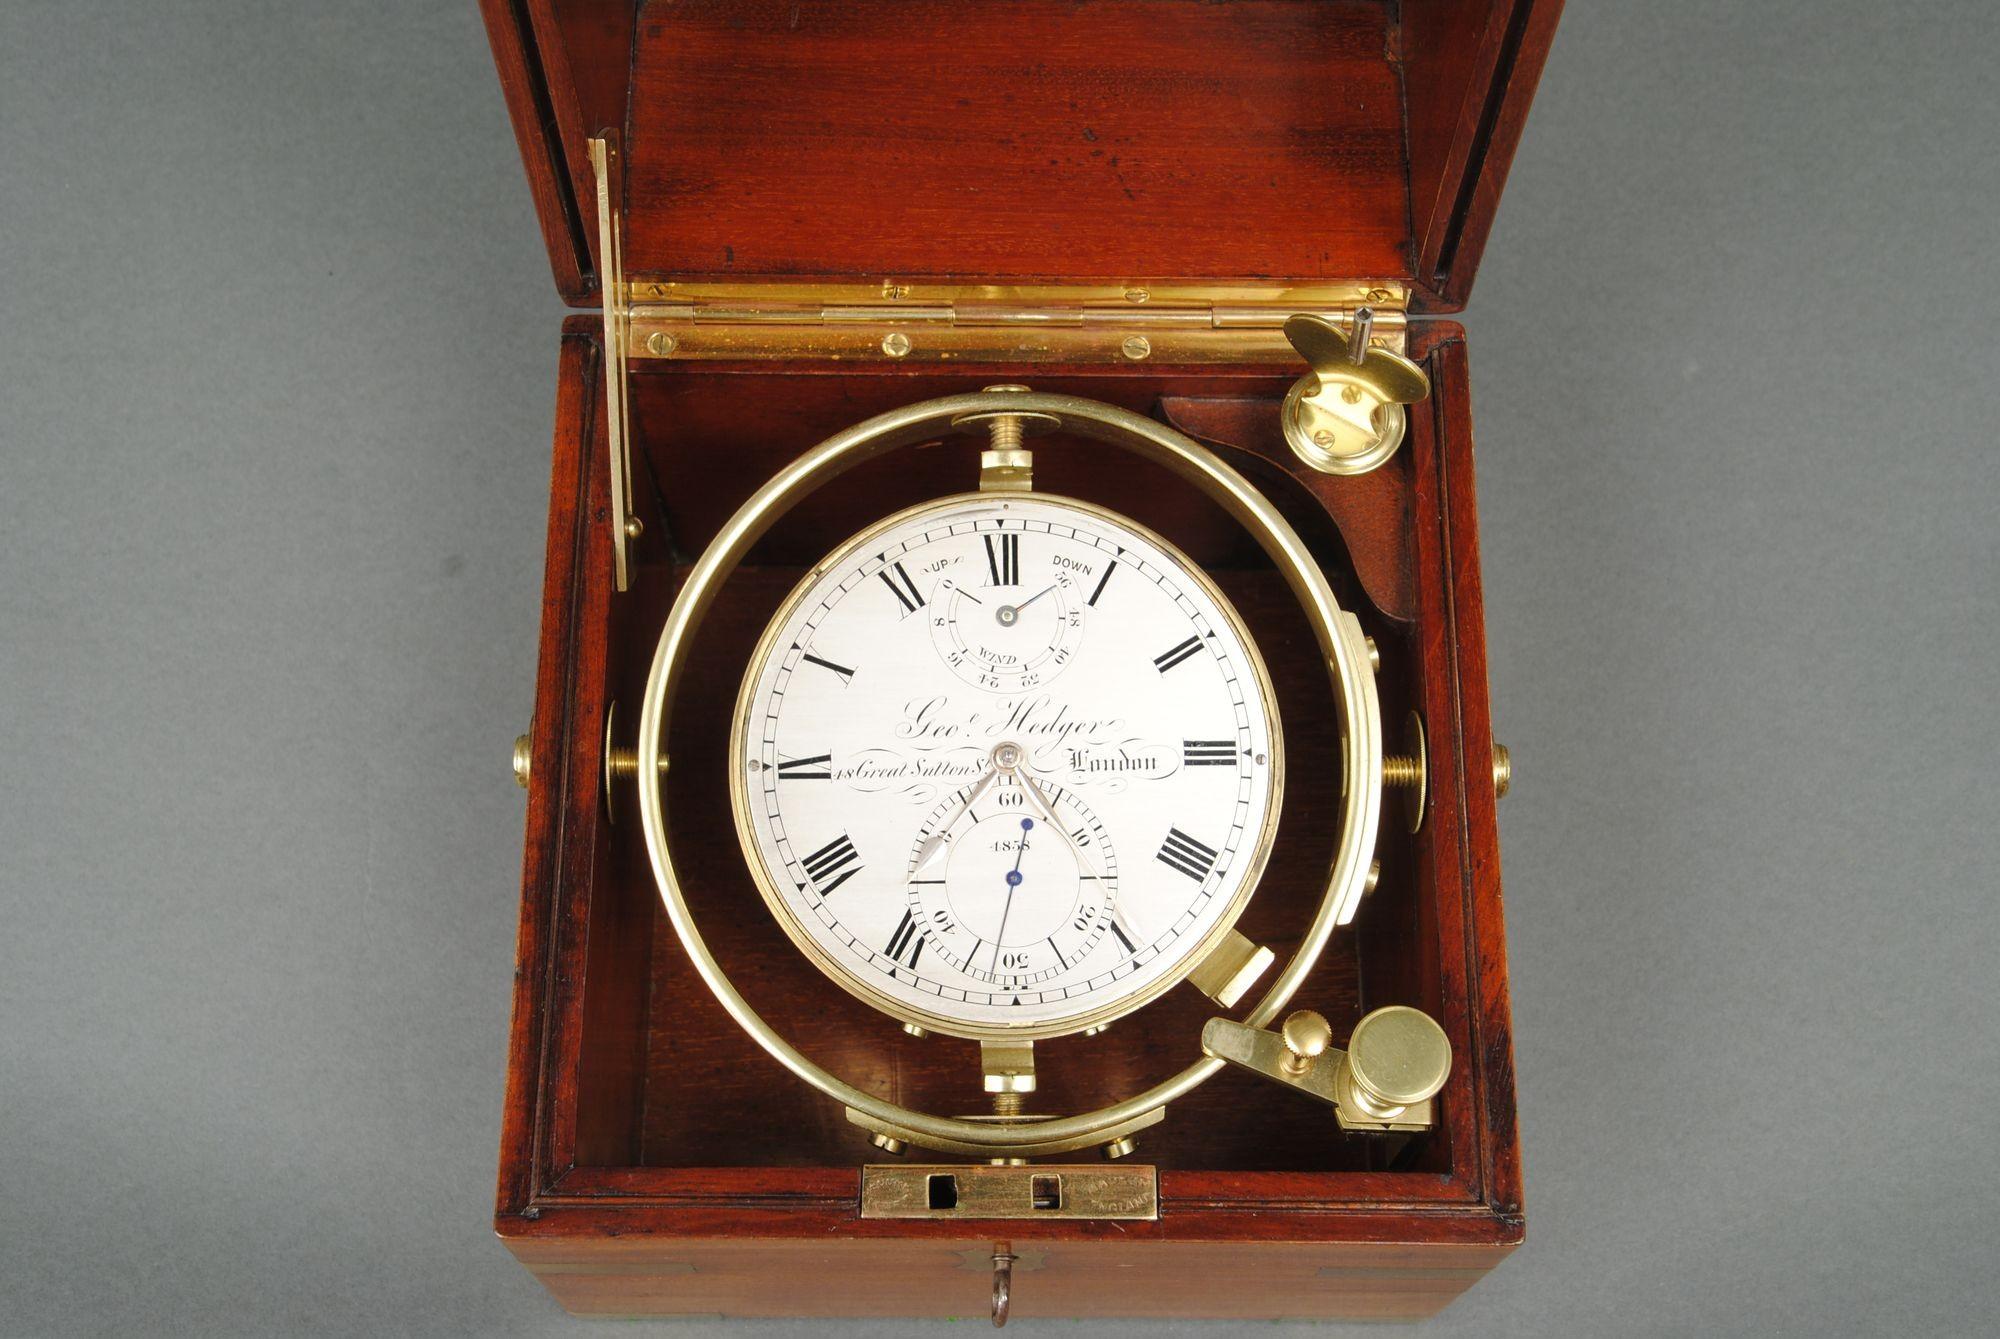 English A Rare 2 Day Marine Chronometer By George Hedger For Sale